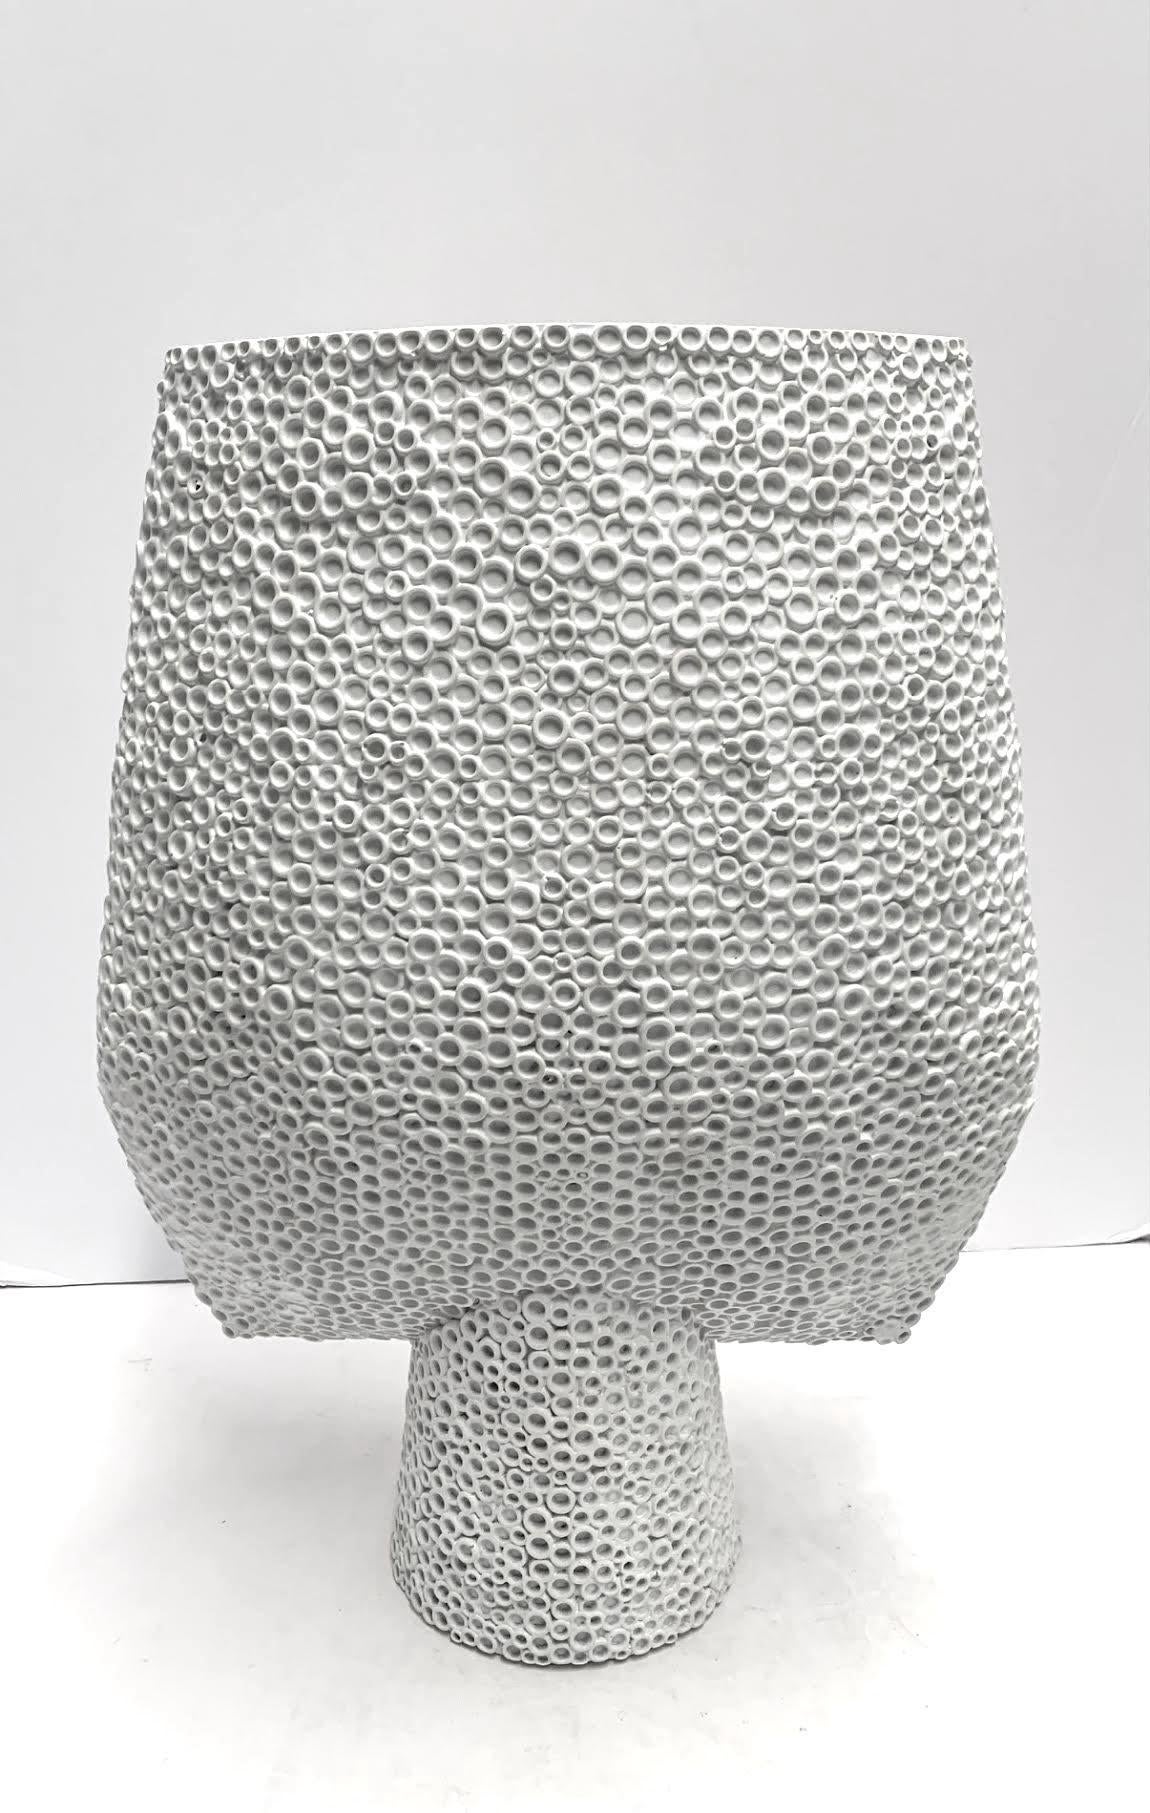 Contemporary Danish designed bone white large arrow shaped vase.
Bold surface texture.
Part of a very large collection.